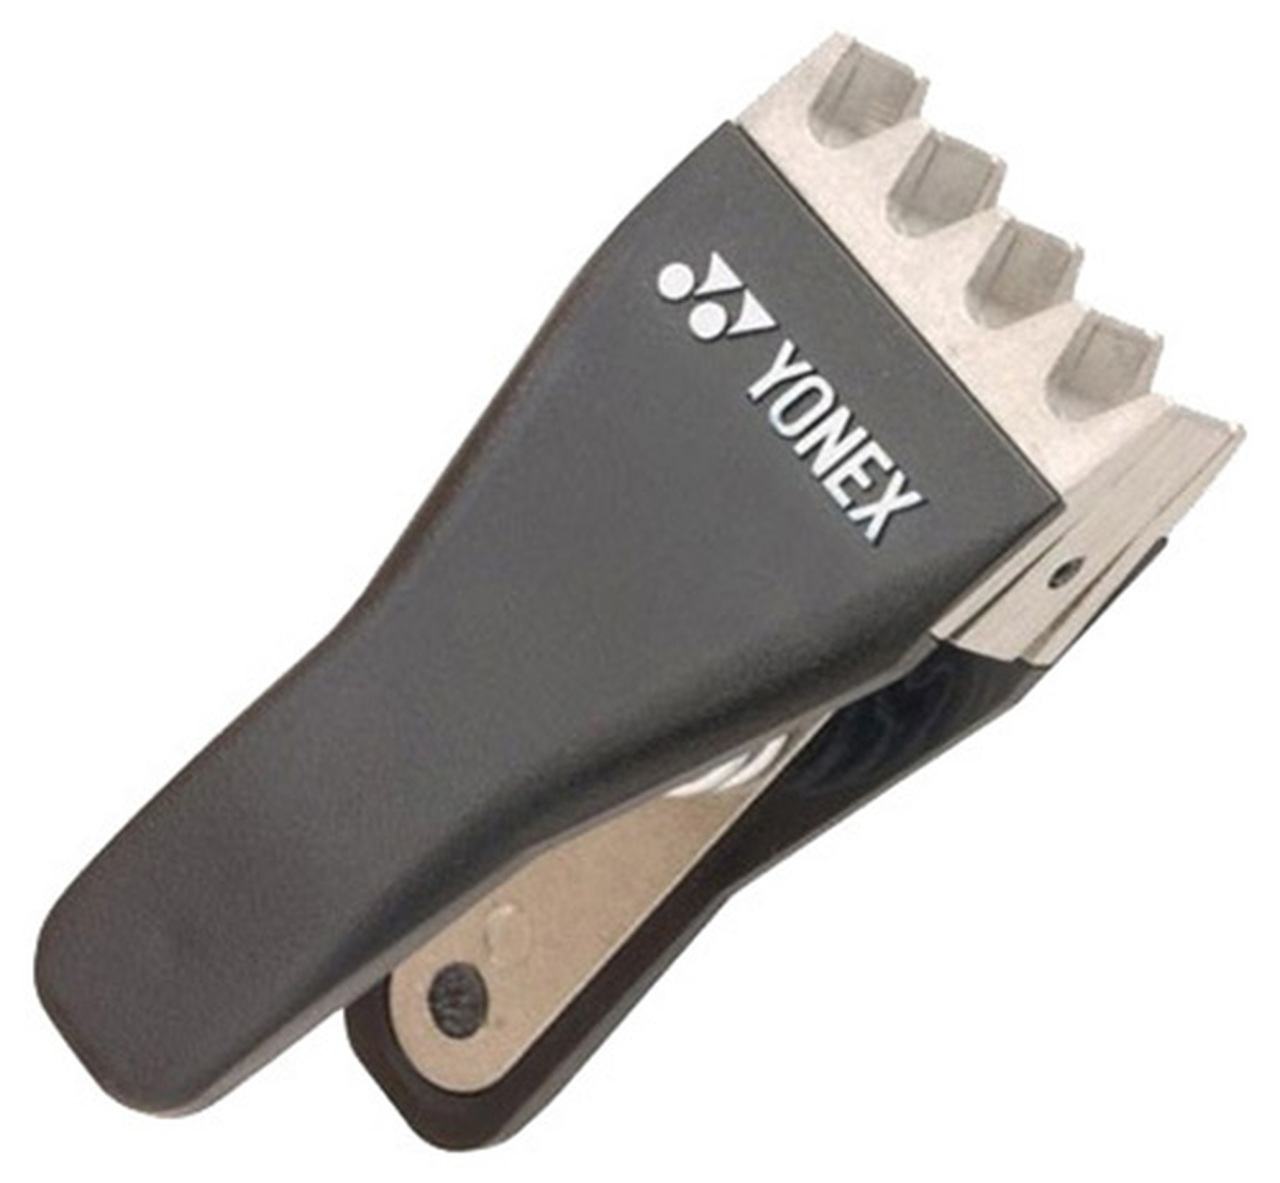 Yonex 5-Tooth Flying Clamp (one pair)